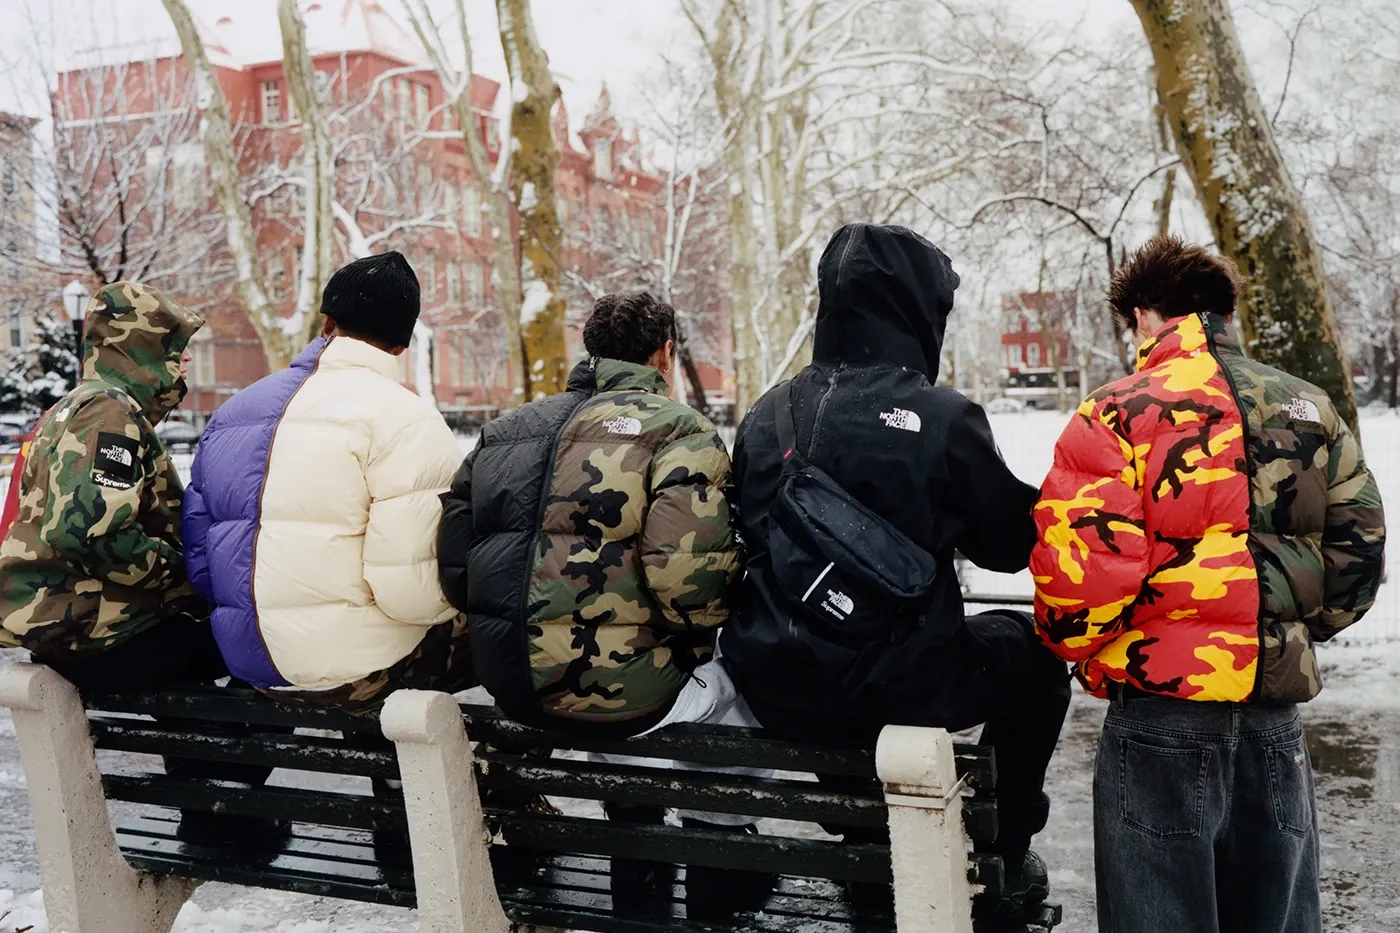 The new Supreme x The North Face collection